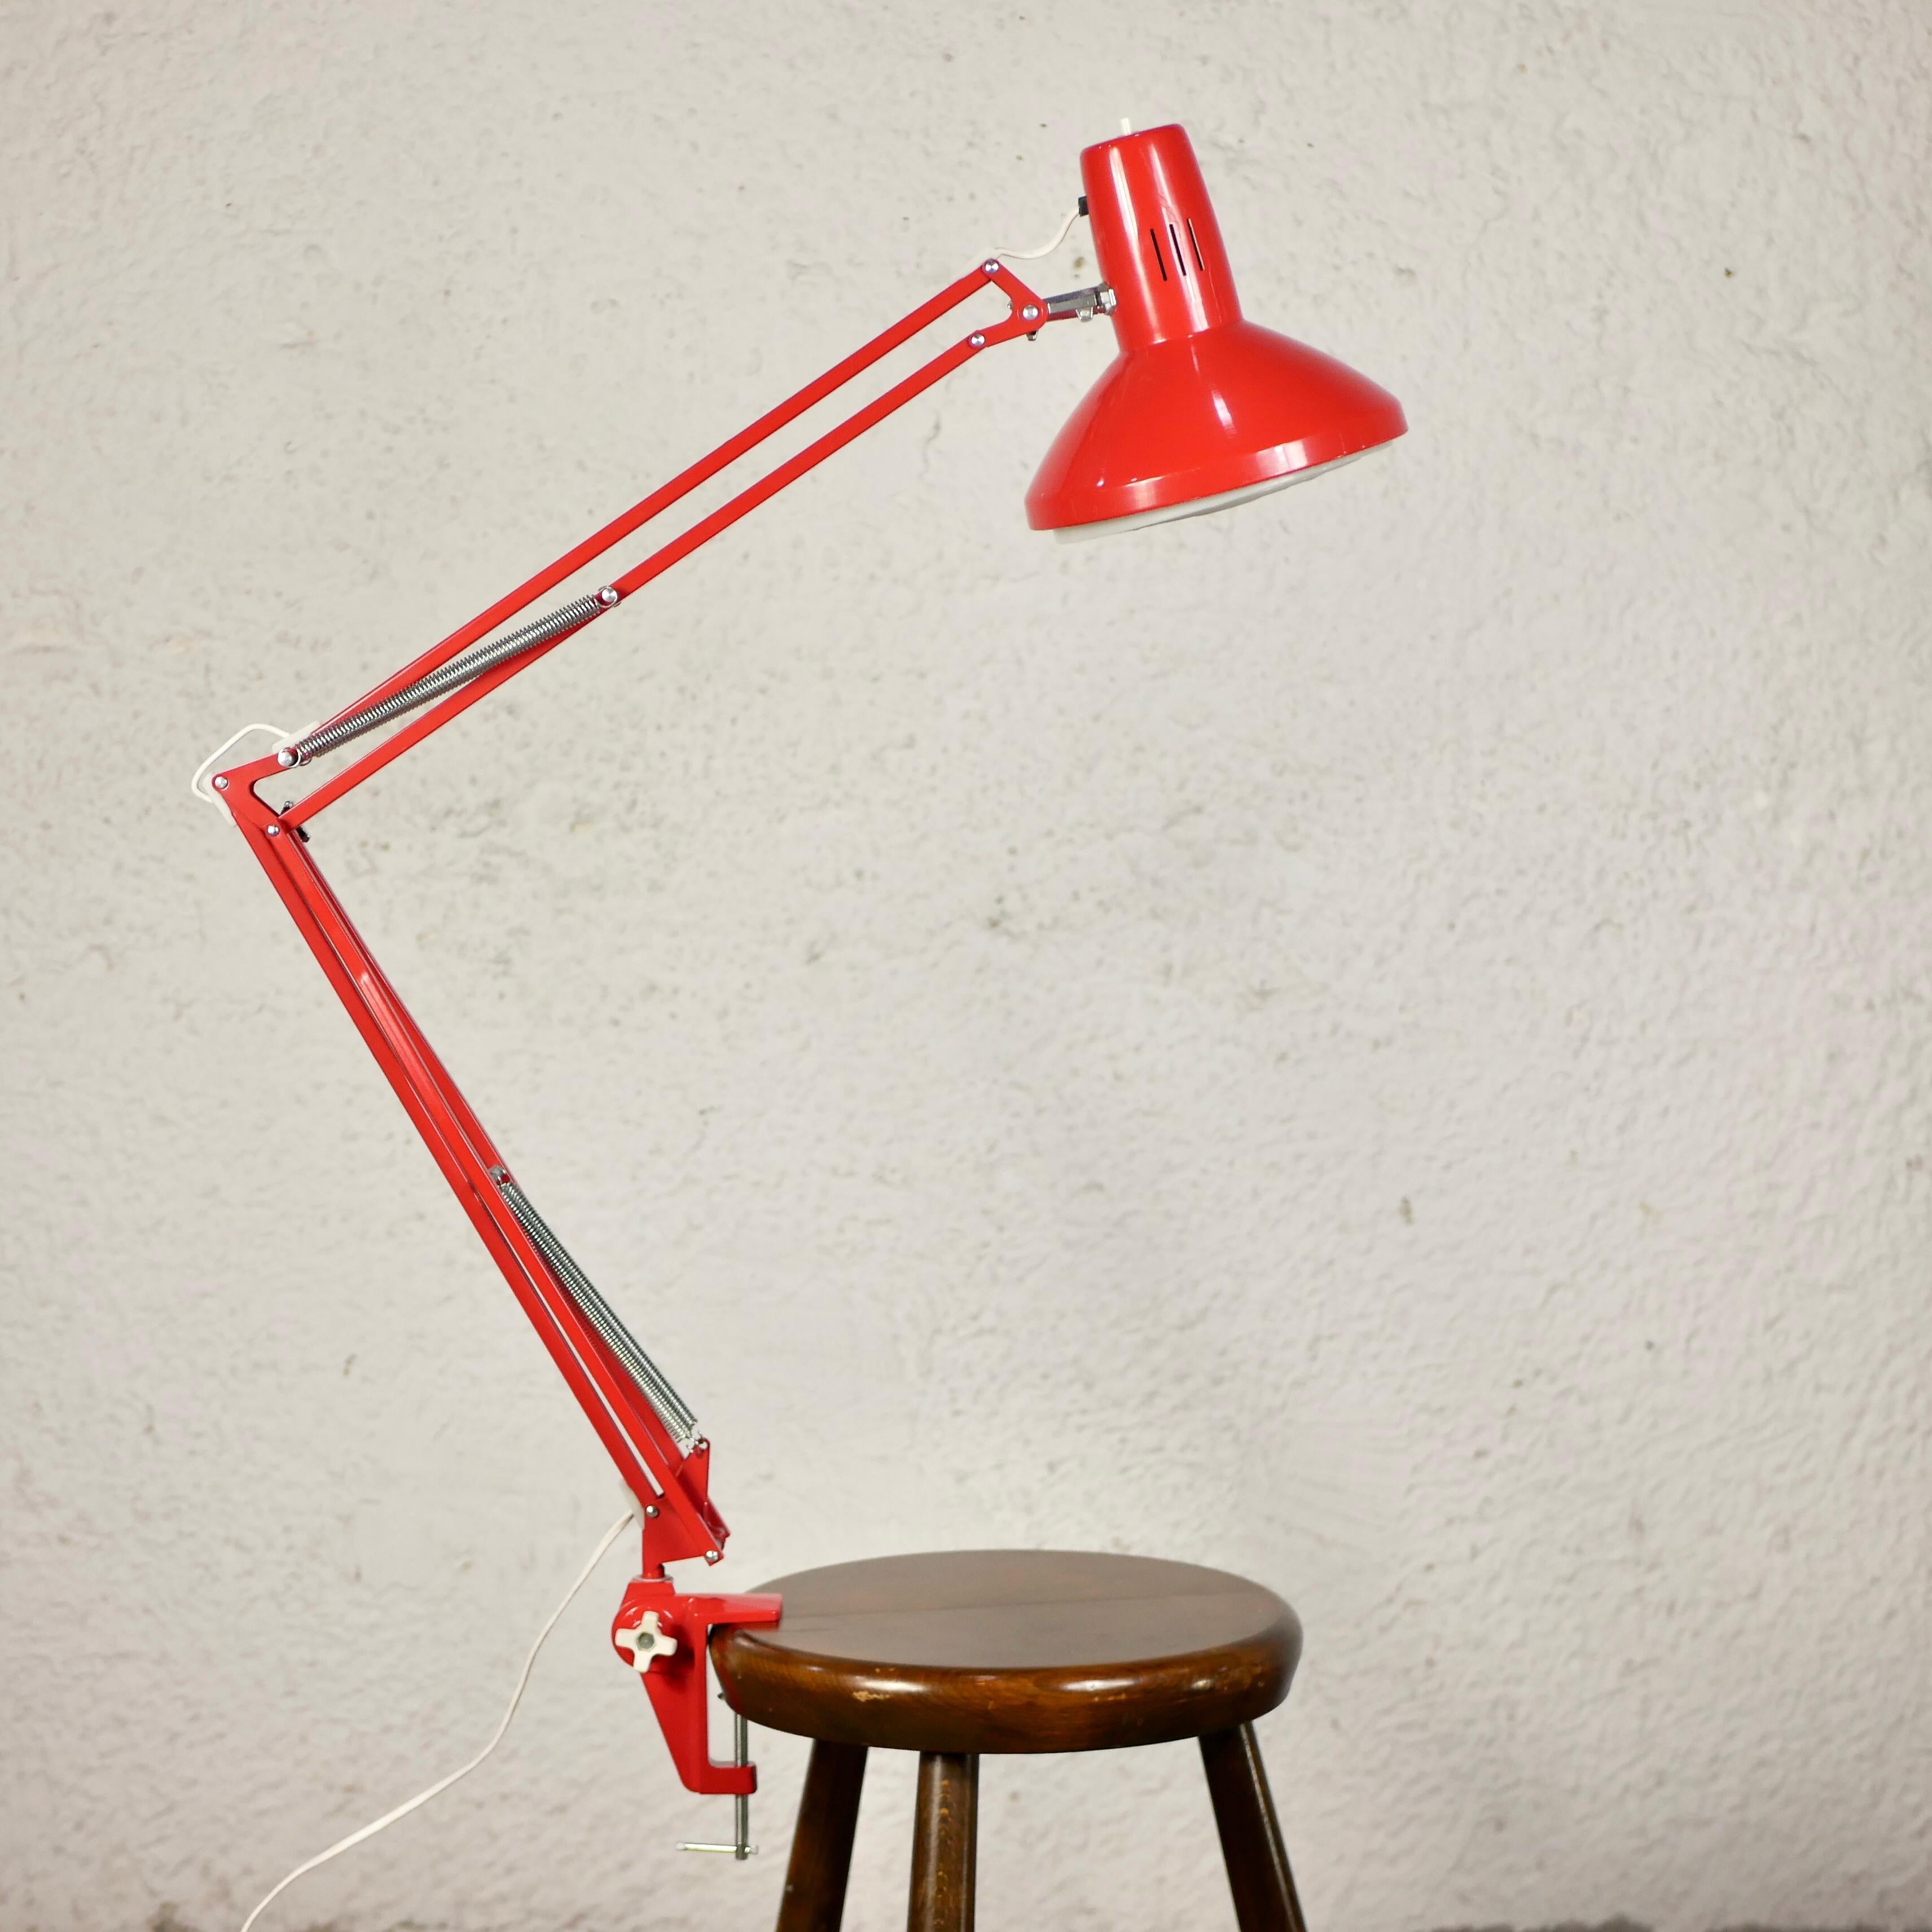 Big articulated desk lamp by Ledu, made in France in the 1970s. Was a workshop lamp before.
Excellent condition.
2 arms of 50cm each, head around 20cm.